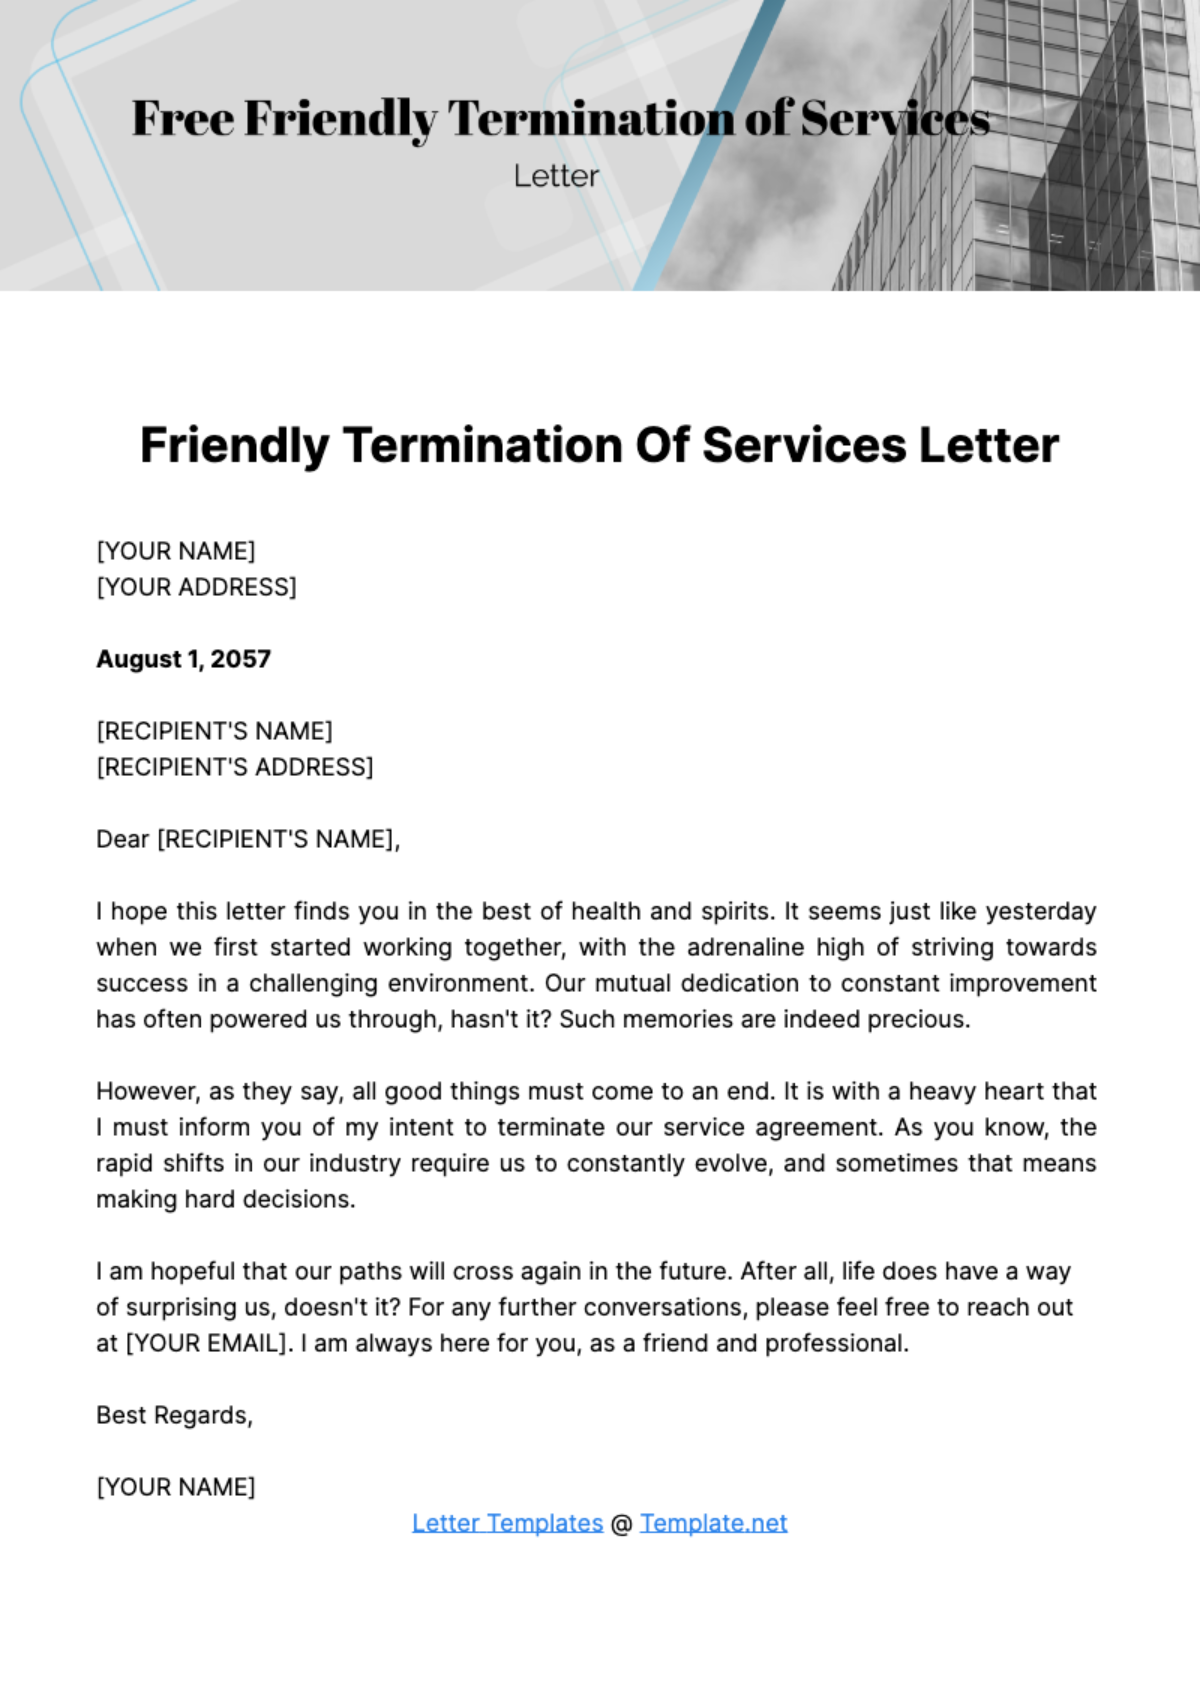 Free Friendly Termination of Services Letter Template